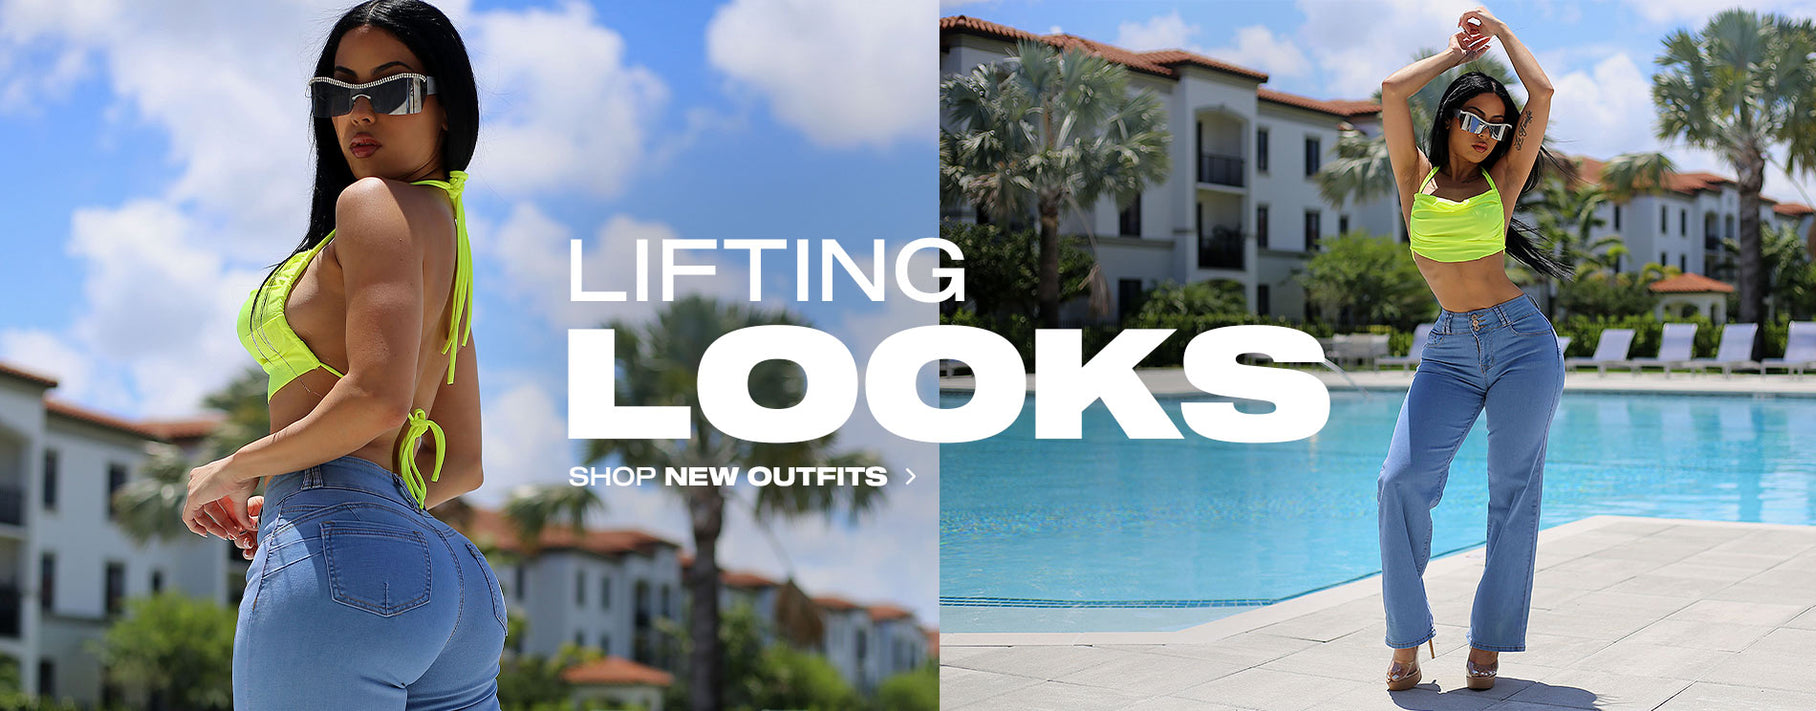 Lifting Looks: Shop New Outfits